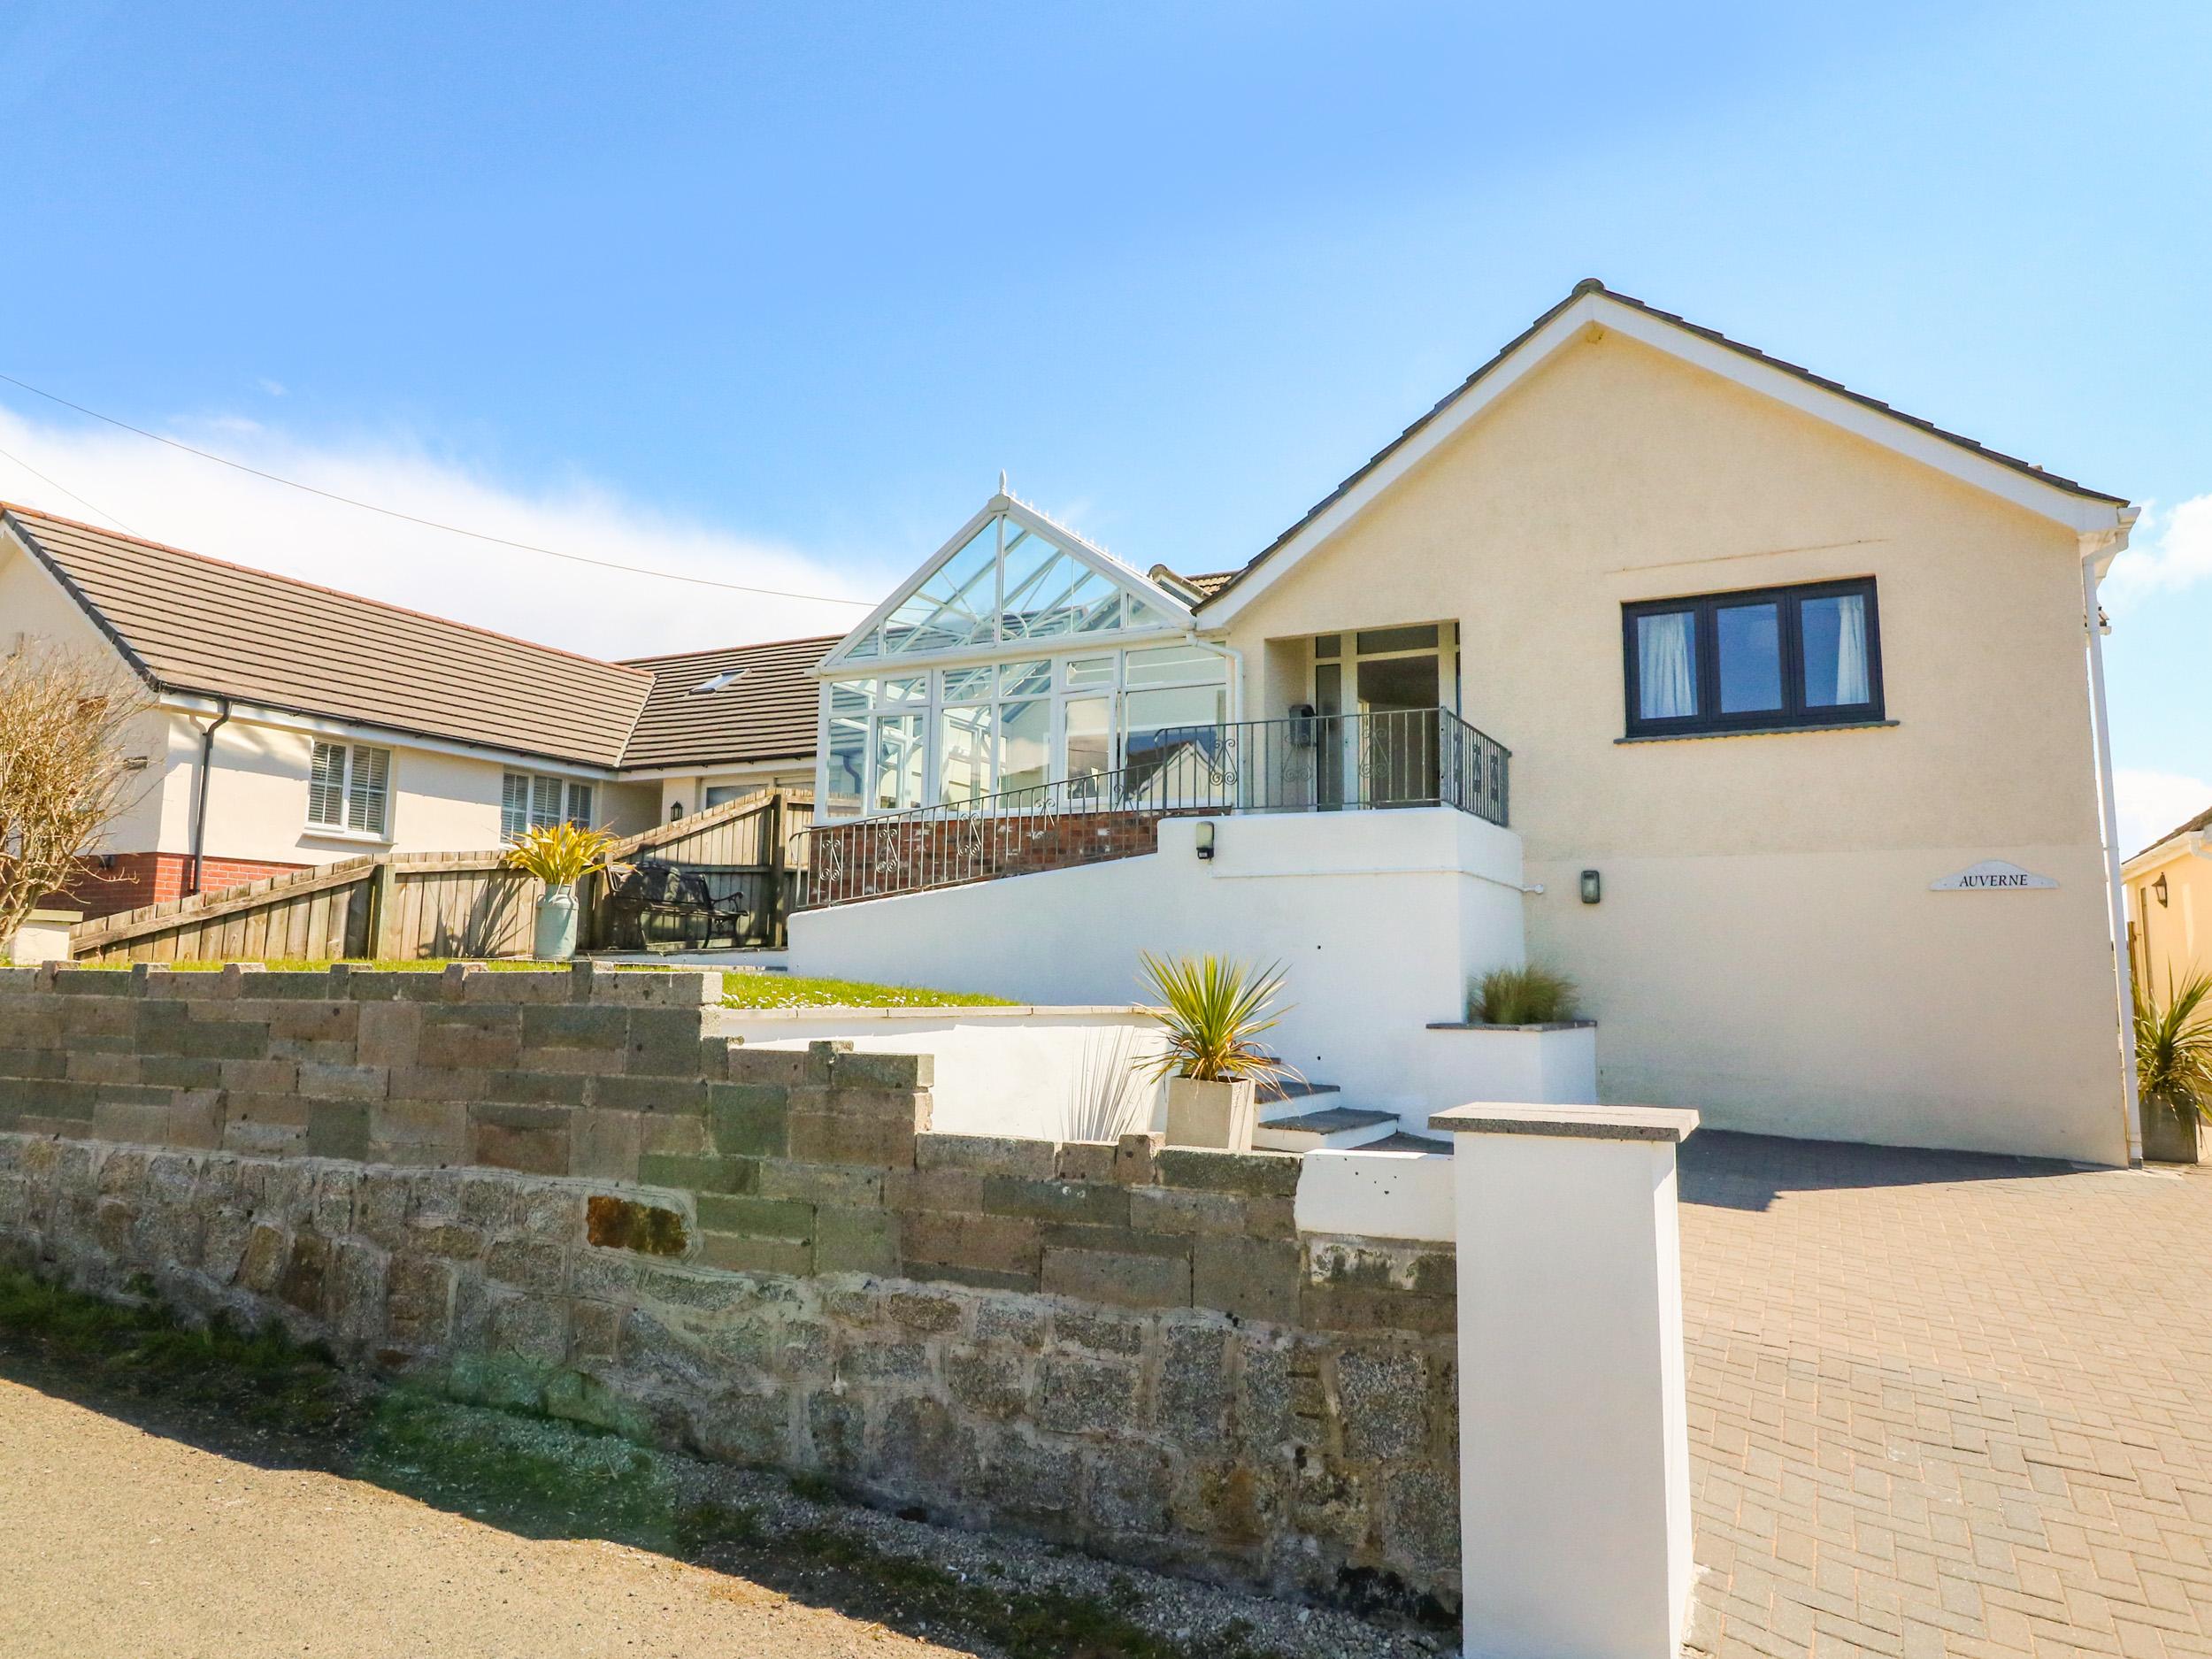 Holiday Cottage Reviews for Auverne - Holiday Cottage in Bude, Cornwall Inc Scilly